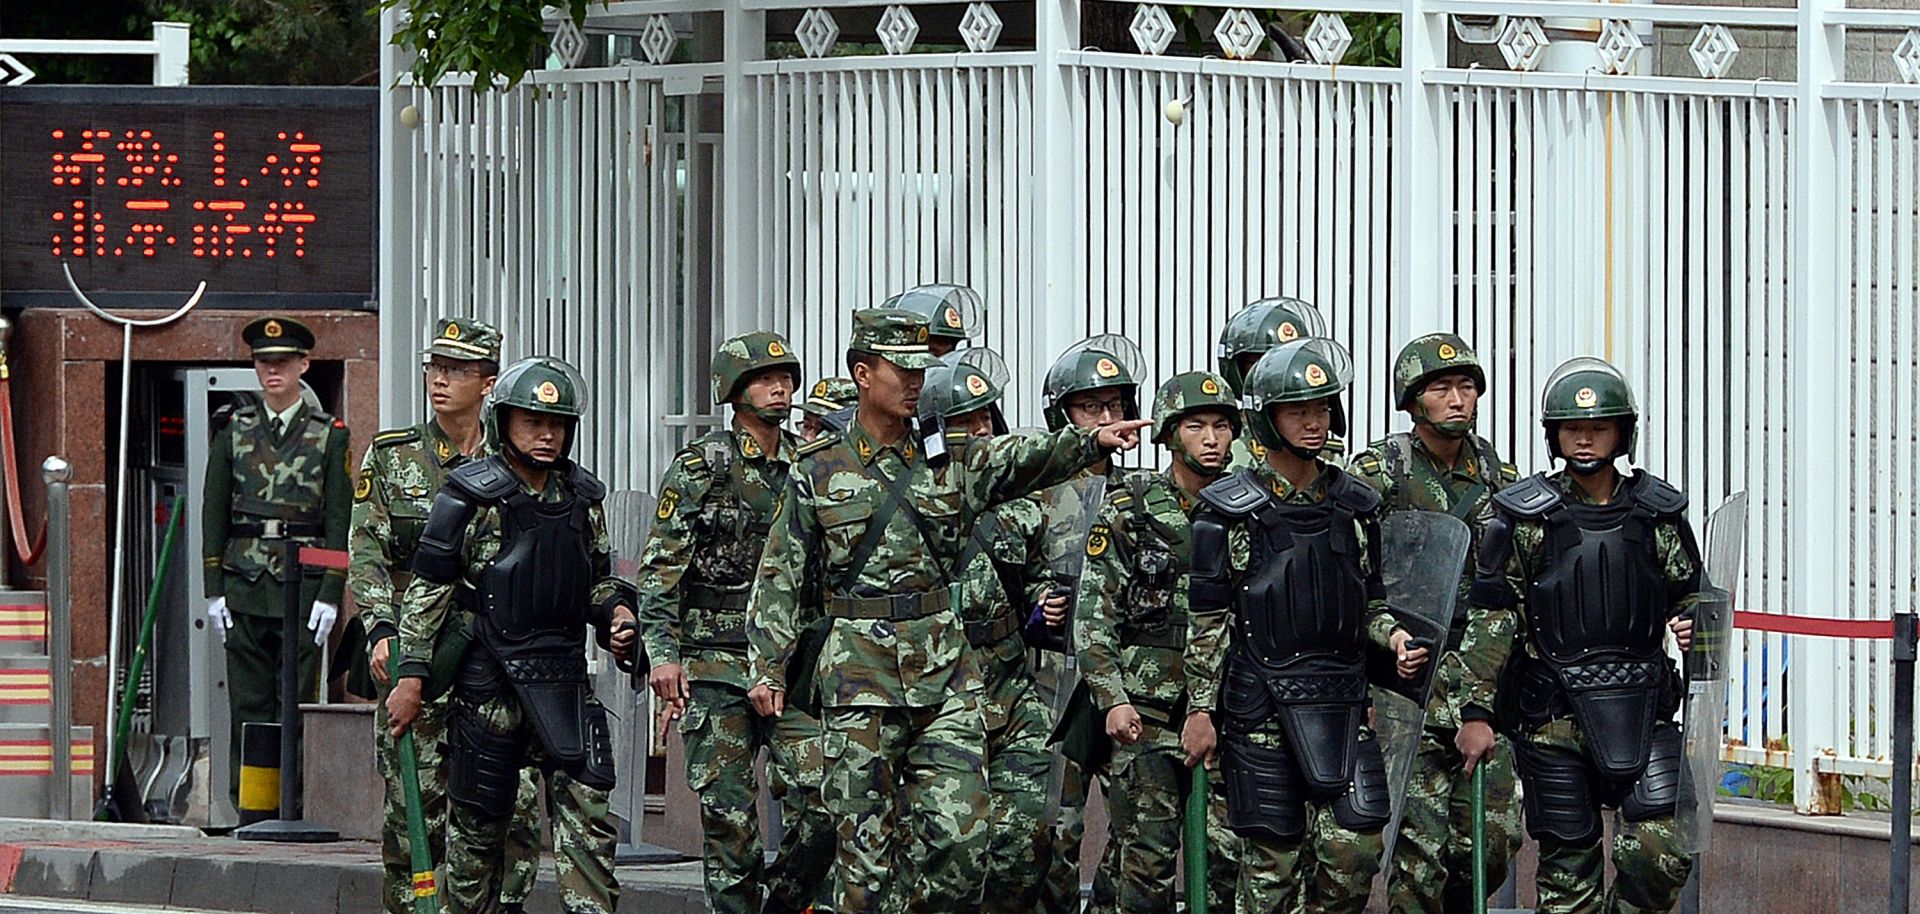 Fully armed Chinese paramilitary police patrol a street in Urumqi.